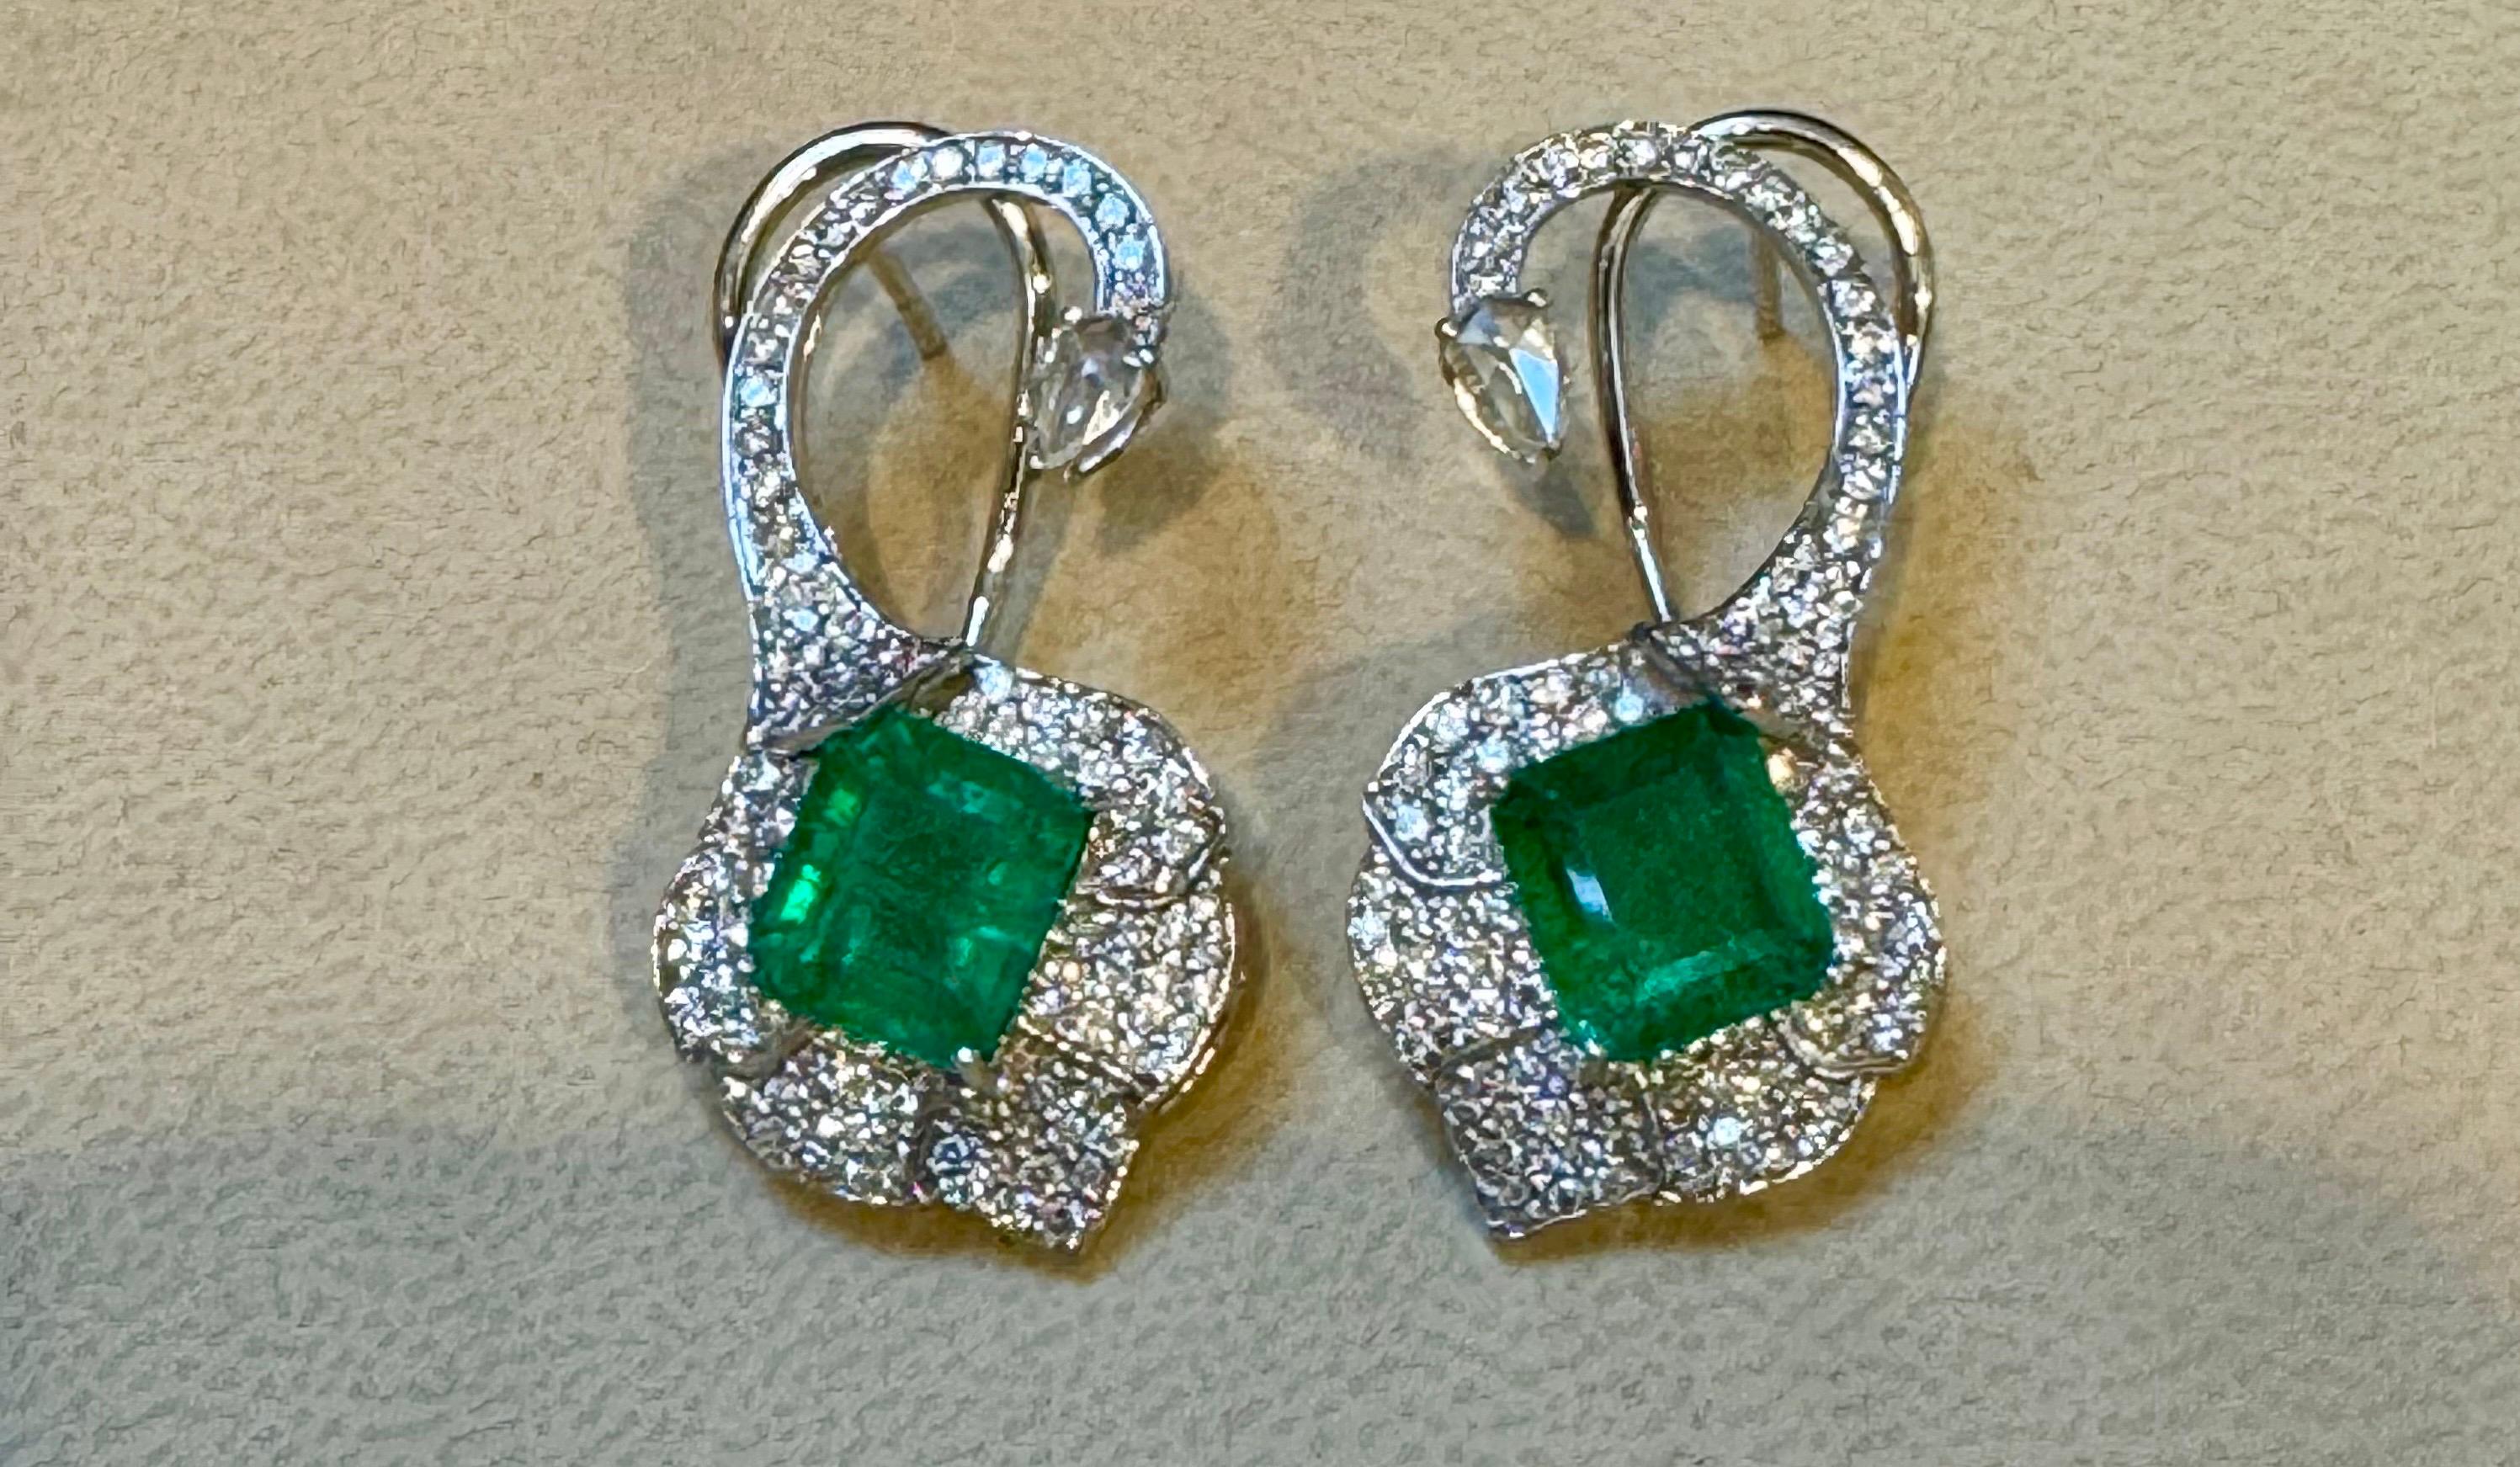 5 Ct Natural Zambian Emerald cut Emerald Earring & 2 Ct Diamond , Rose cut Diamond Earring
 
This exquisite pair of earrings are beautifully crafted in 18 Karat white gold
Weight of 18 Karat gold is 9.6 Grams with emeralds
Origin Zambian
Natural